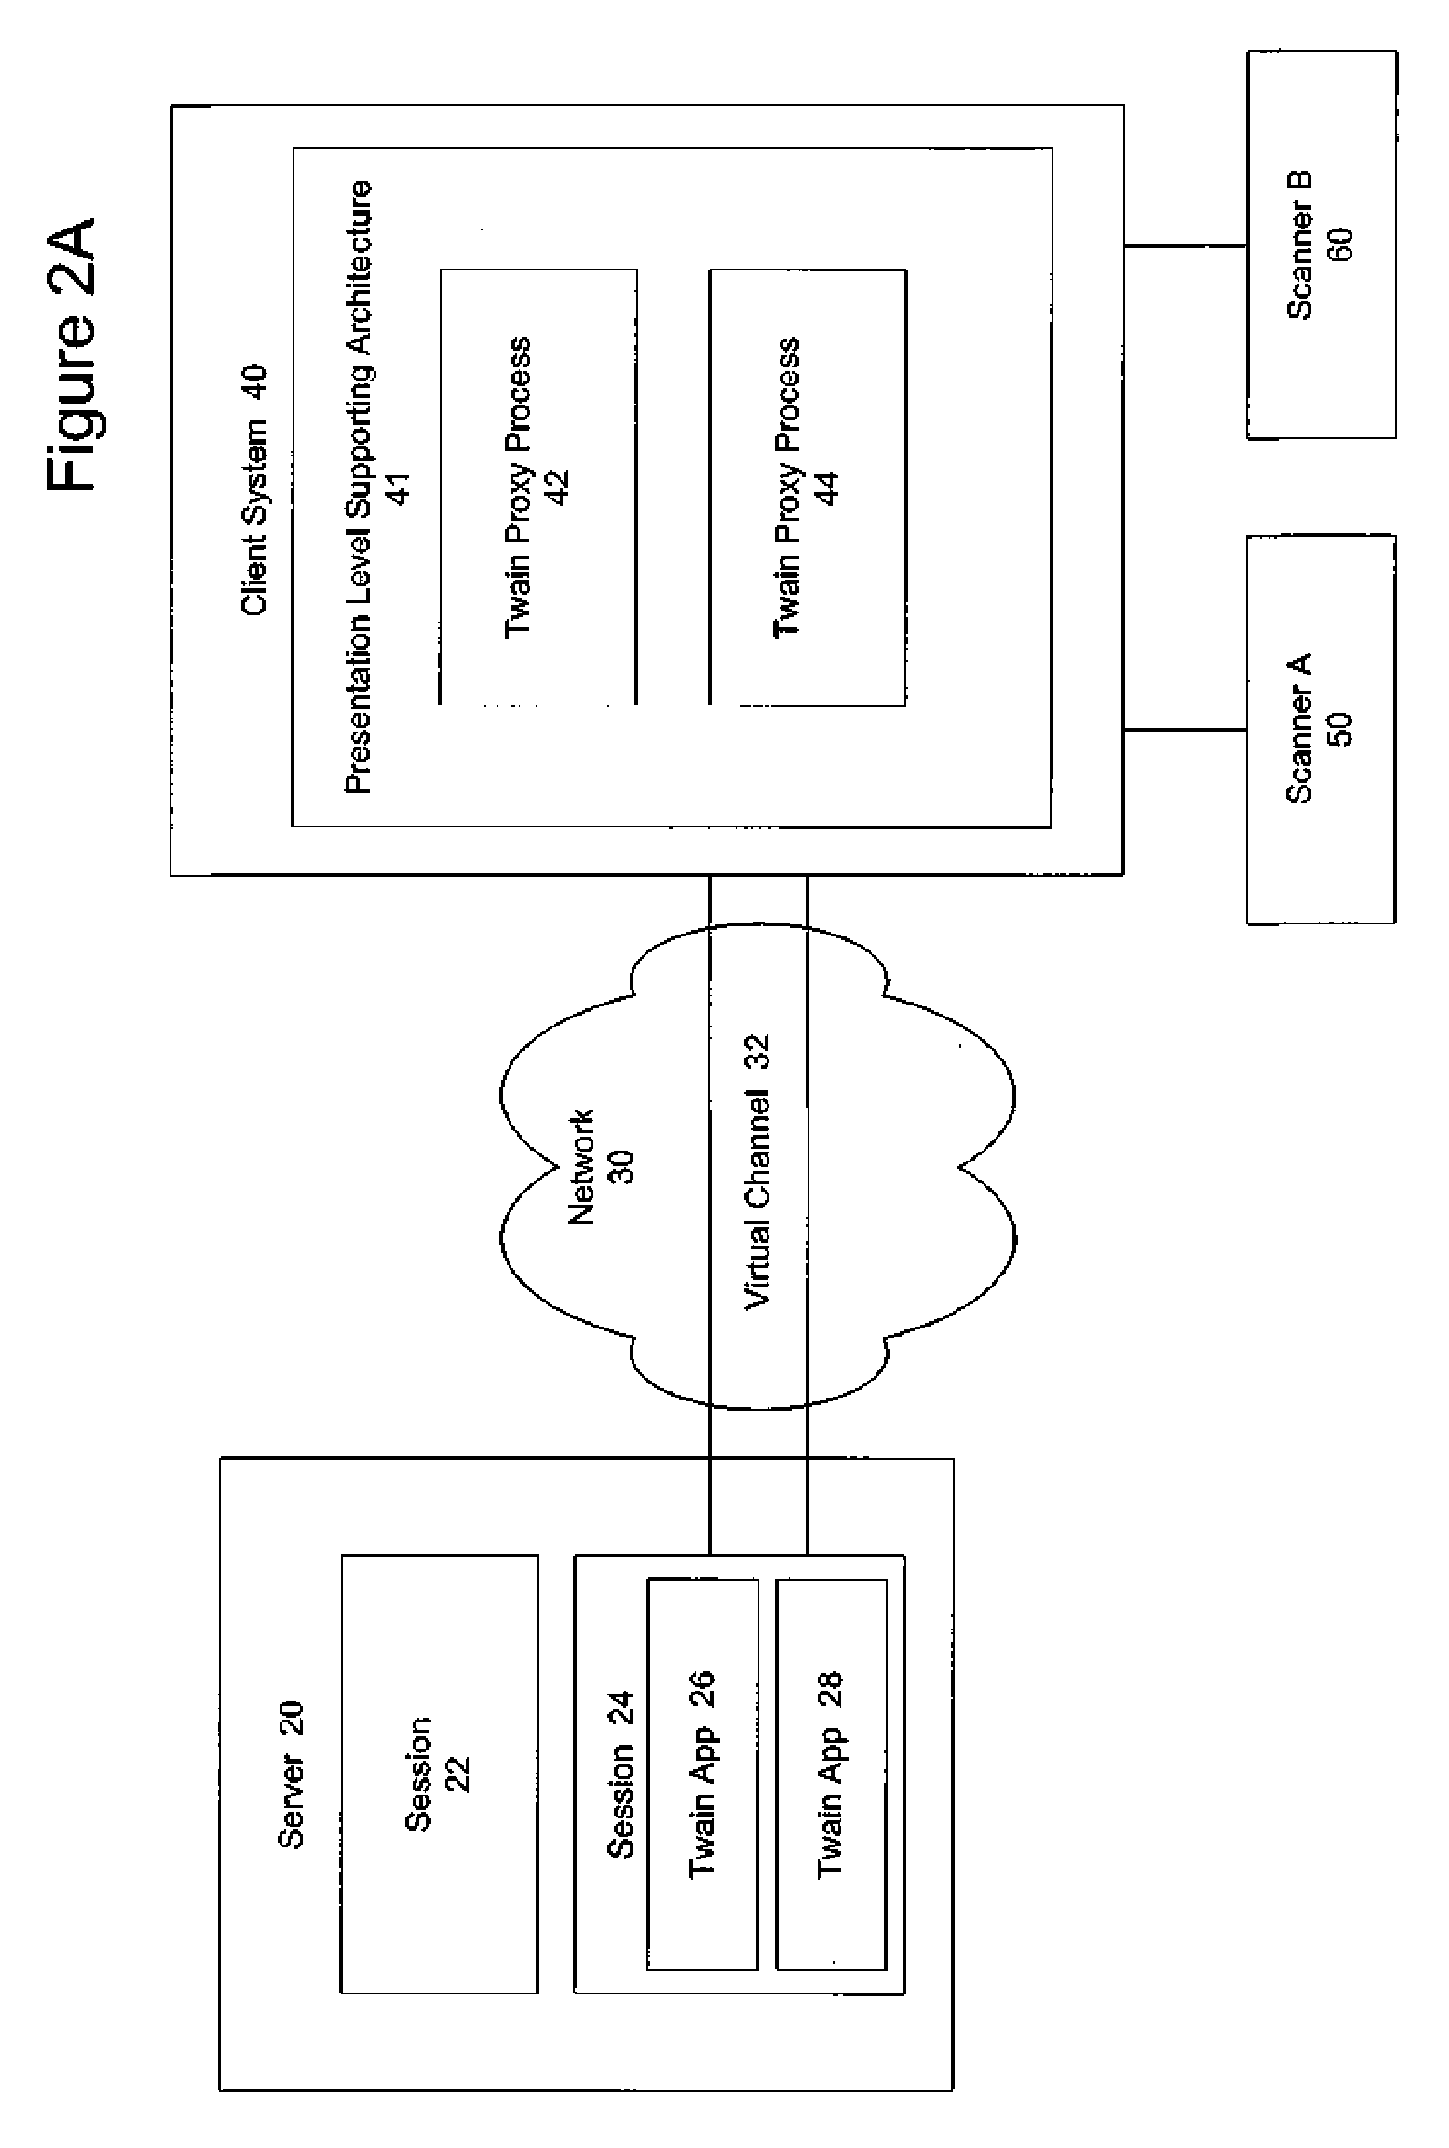 System and method for remoting twain function calls from a user session to a client system